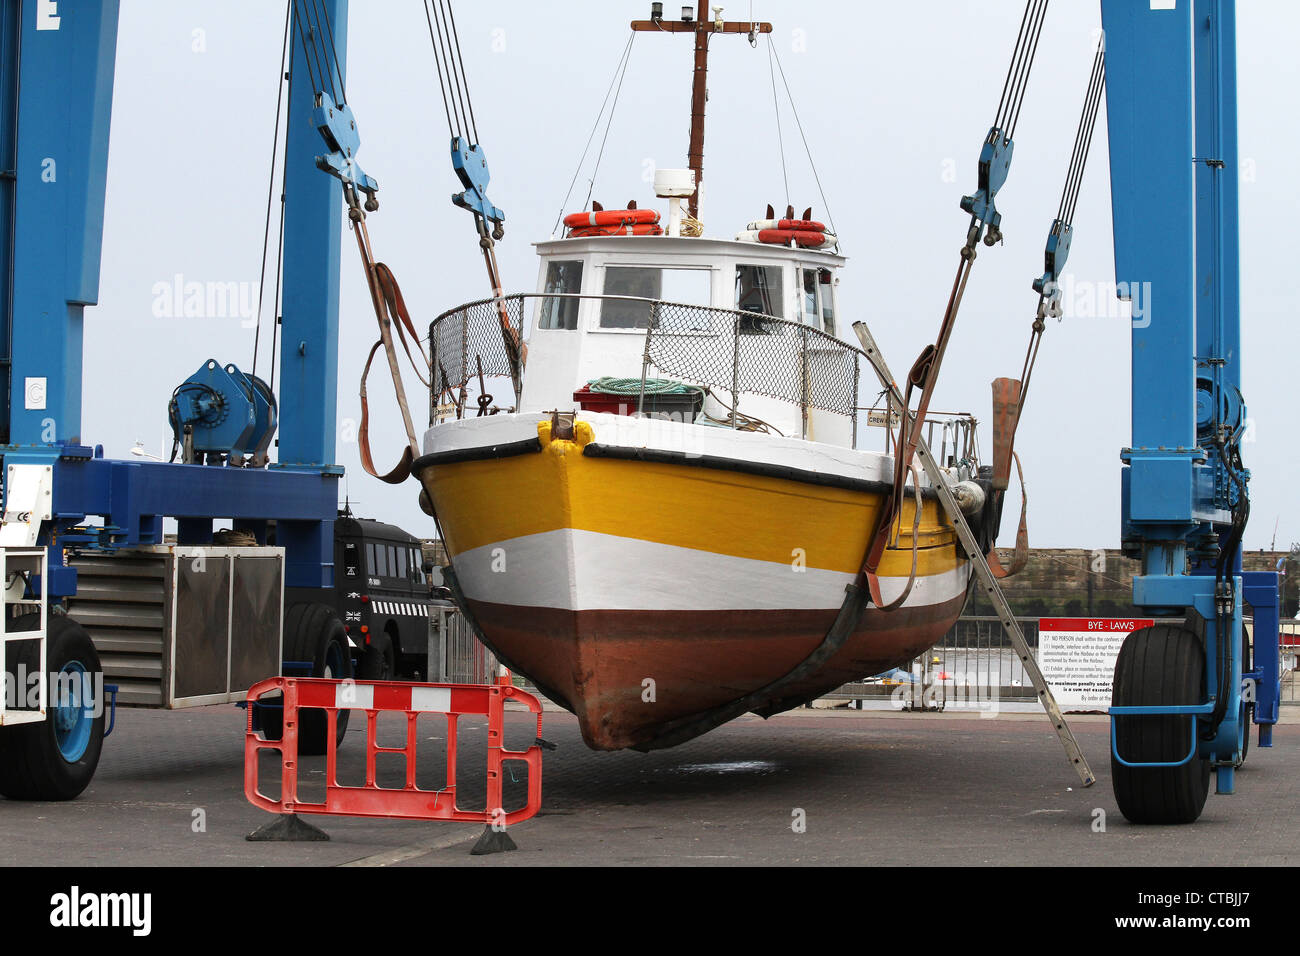 Boat in crane lift sling on harbor quay side for repair work. Stock Photo